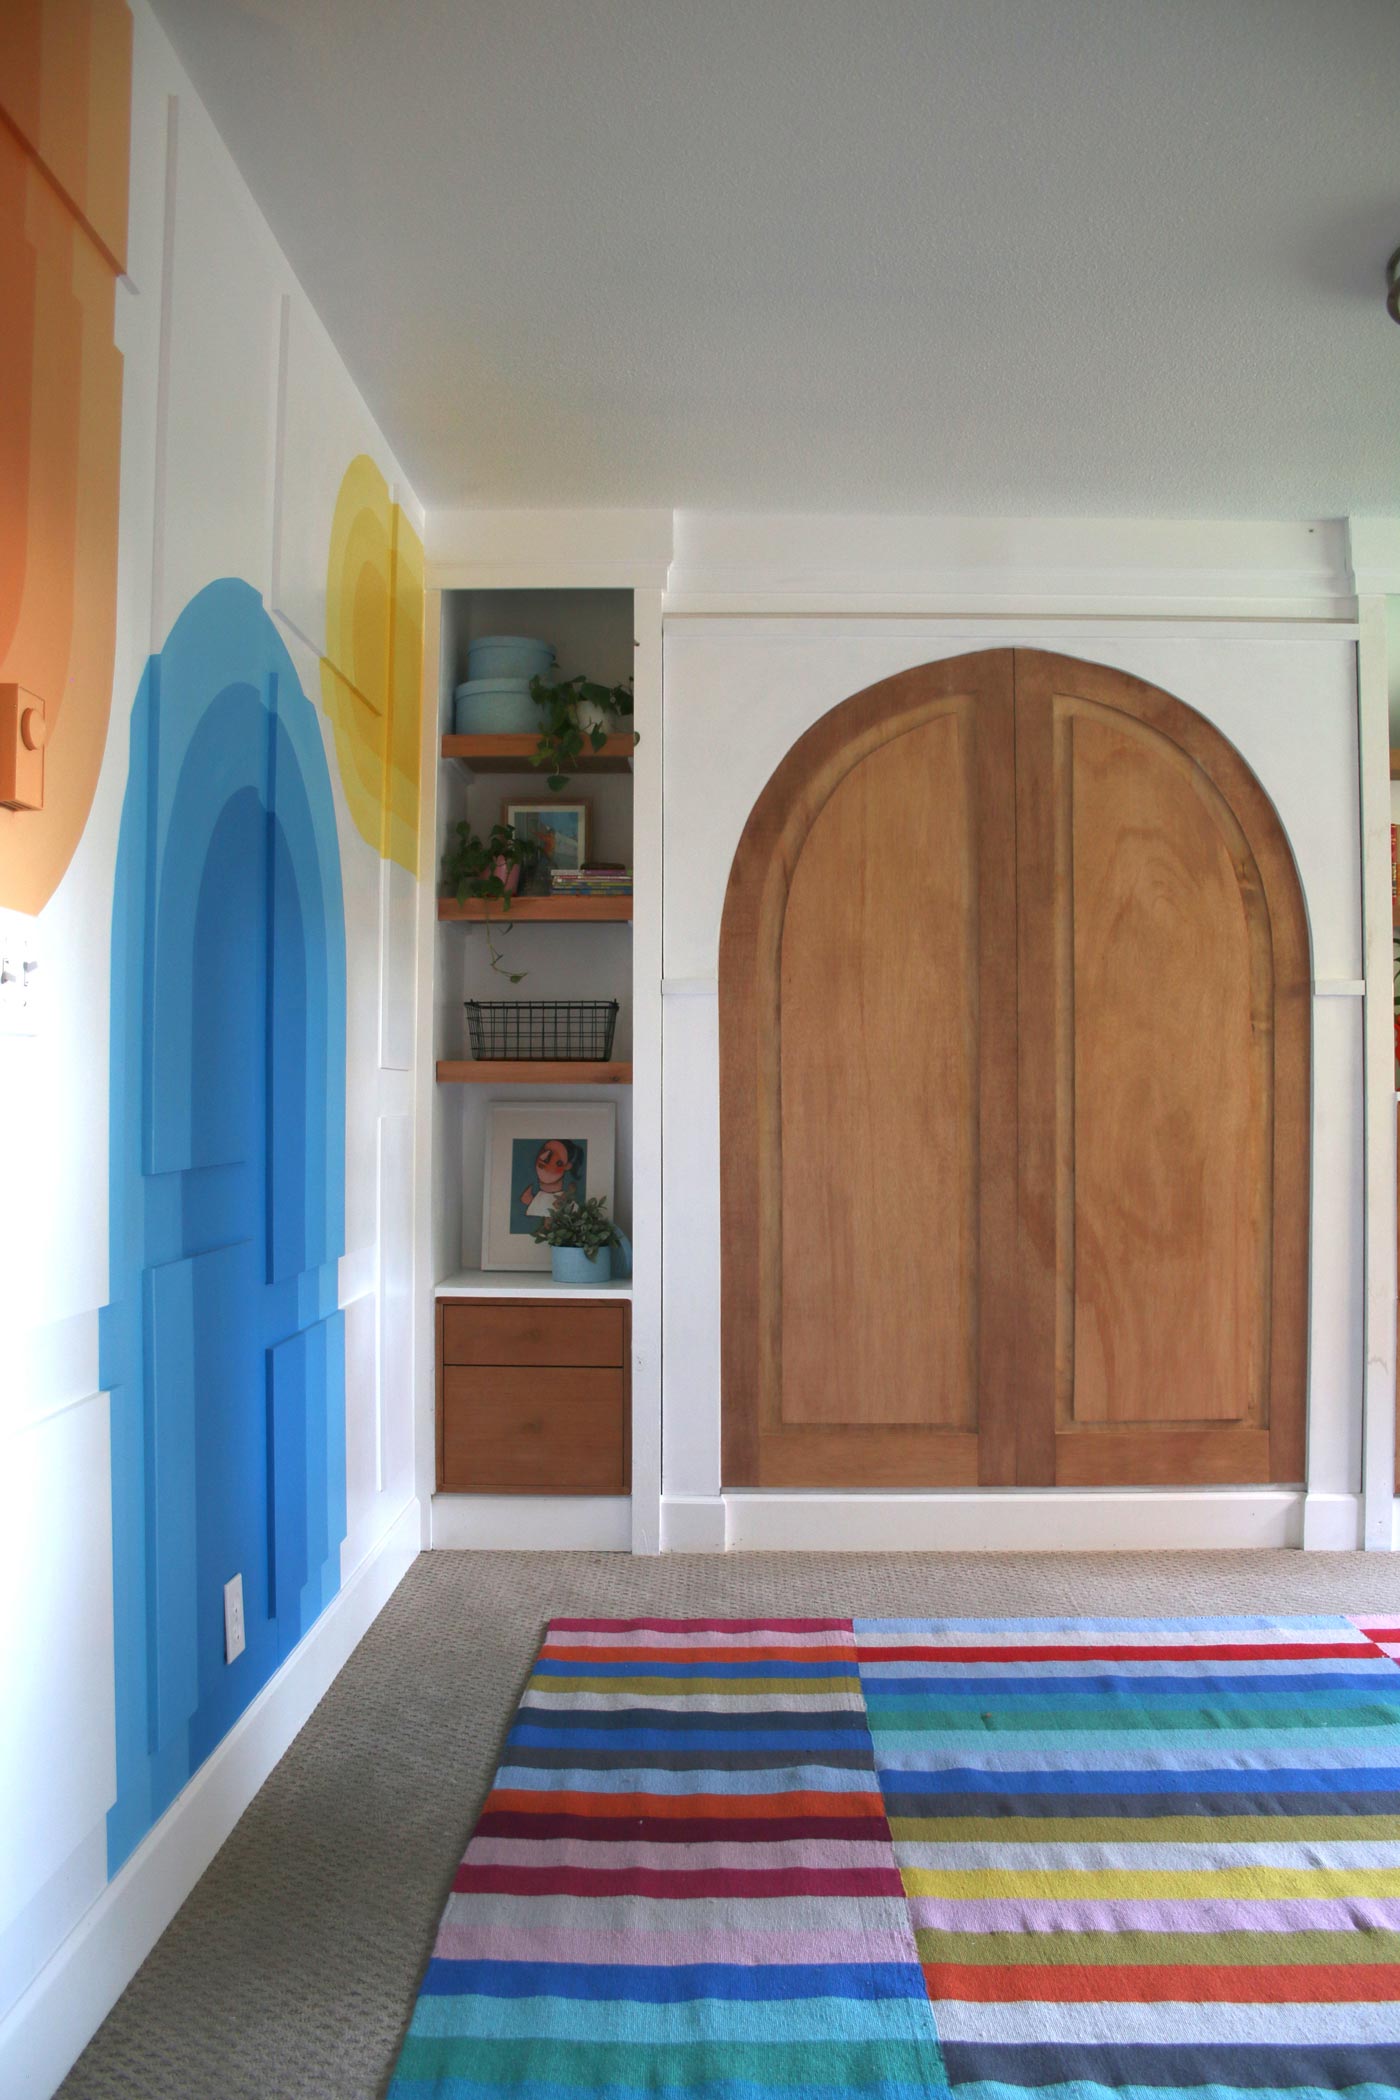 feature-wall-with-painted-arches-and-murphy-bed-with-arched-doors